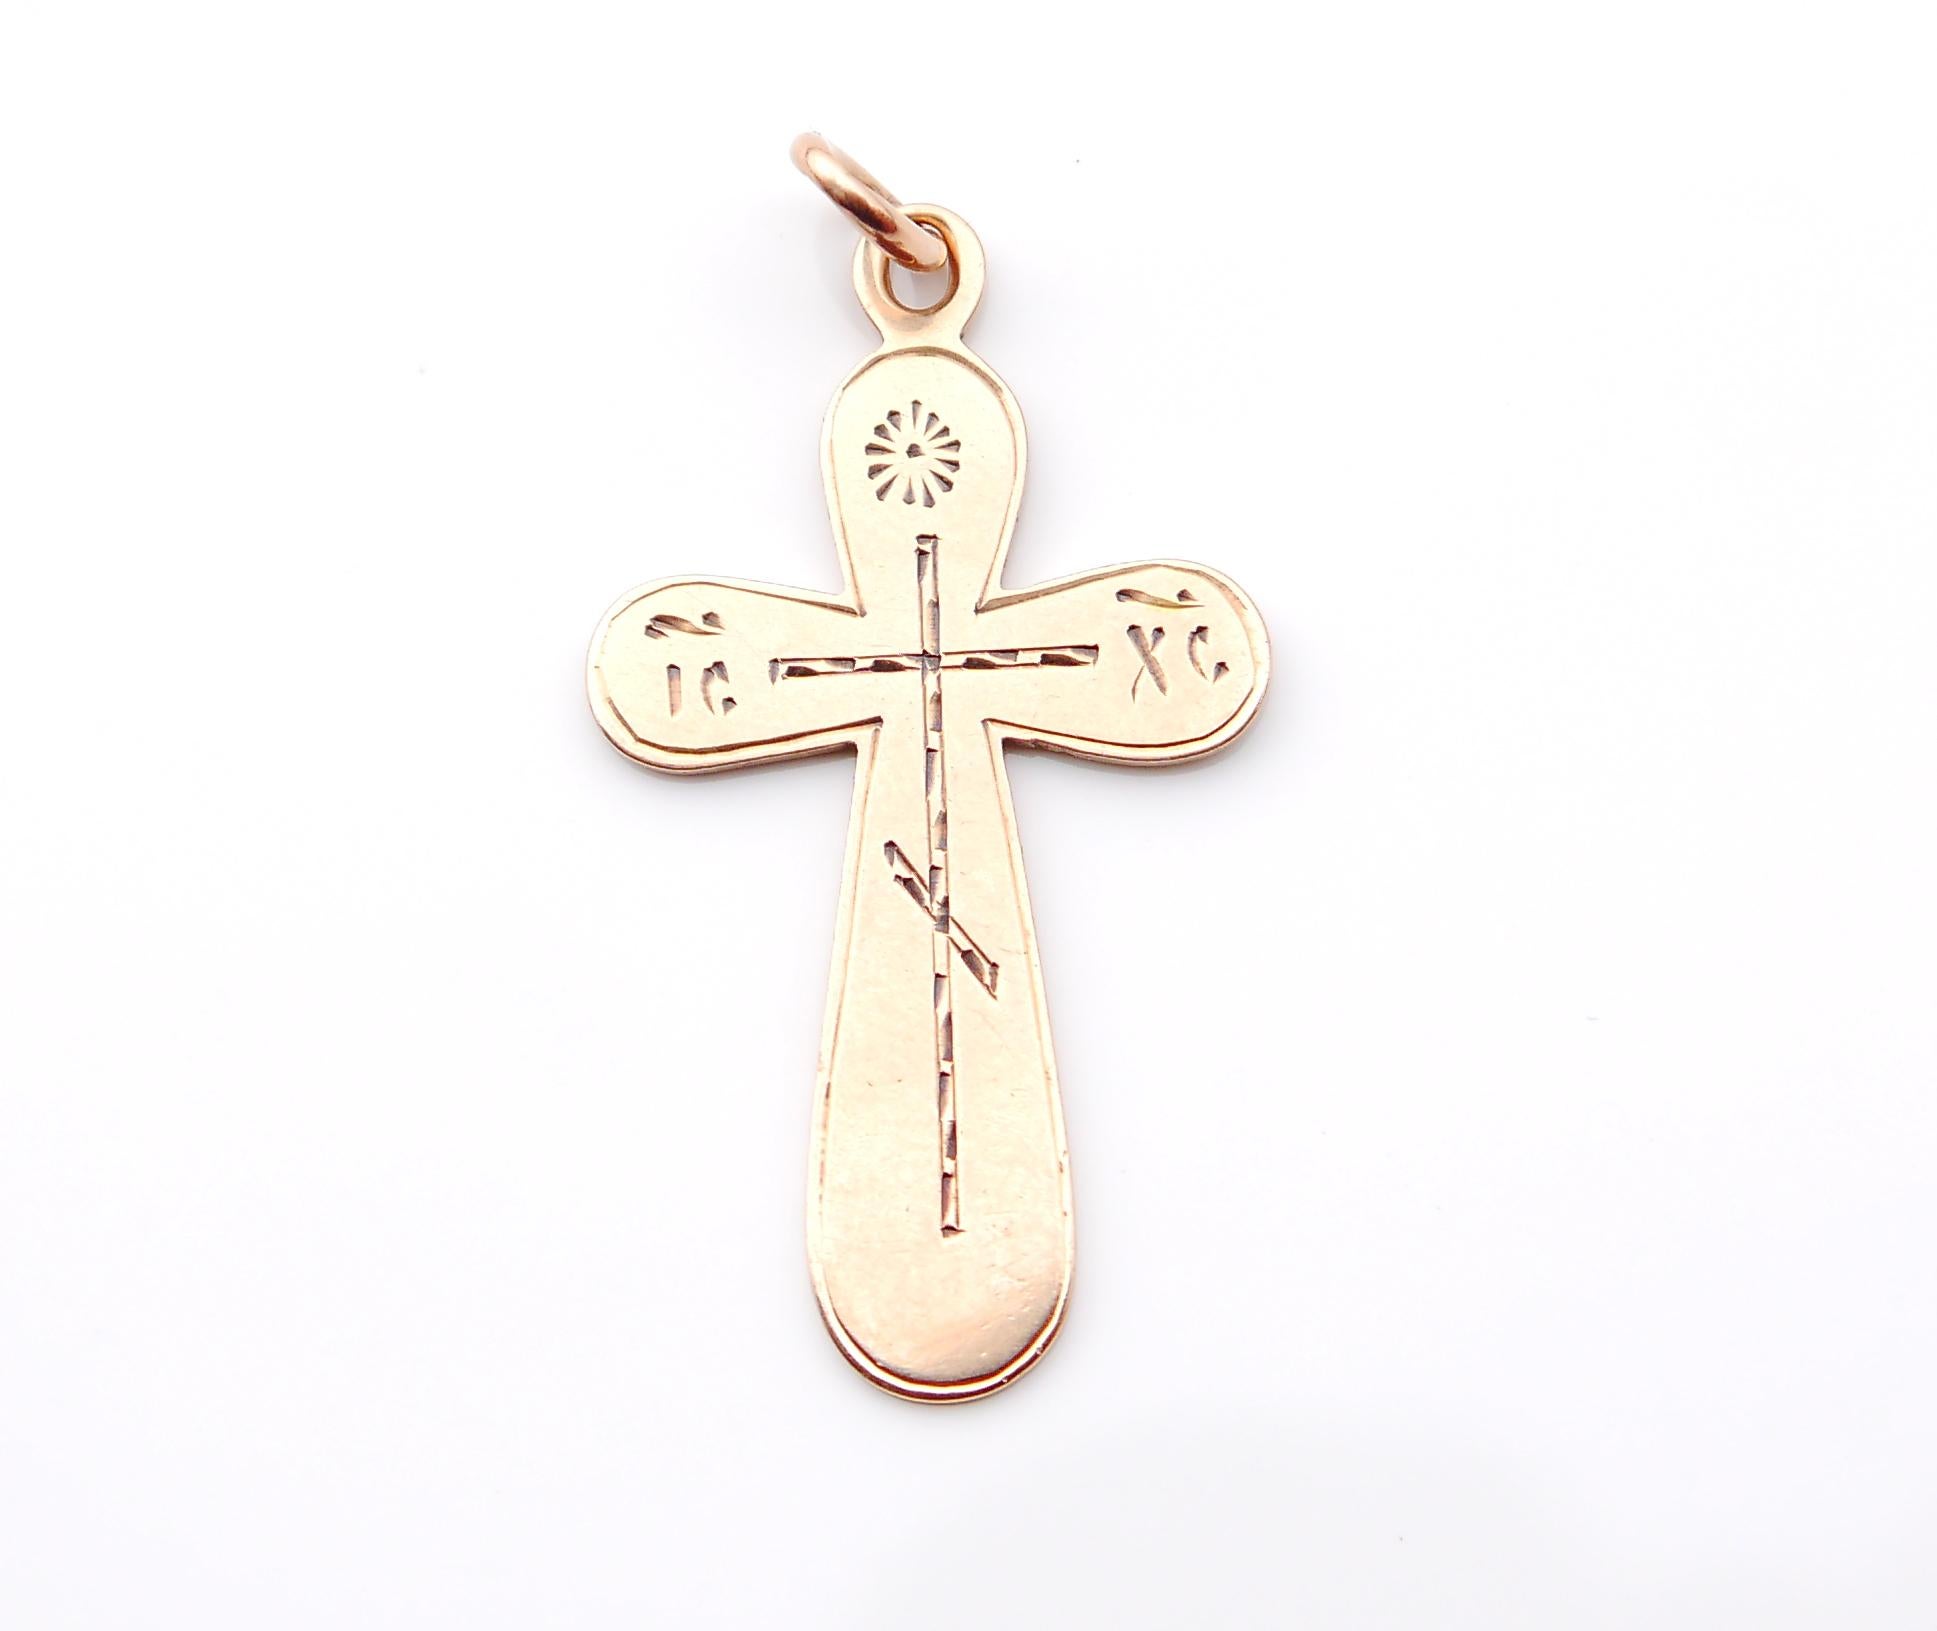 Art Nouveau Russian Imperial Orthodox Cross Crucifix Solid 56 / 14K Gold /4.5cm / 4.2gr For Sale